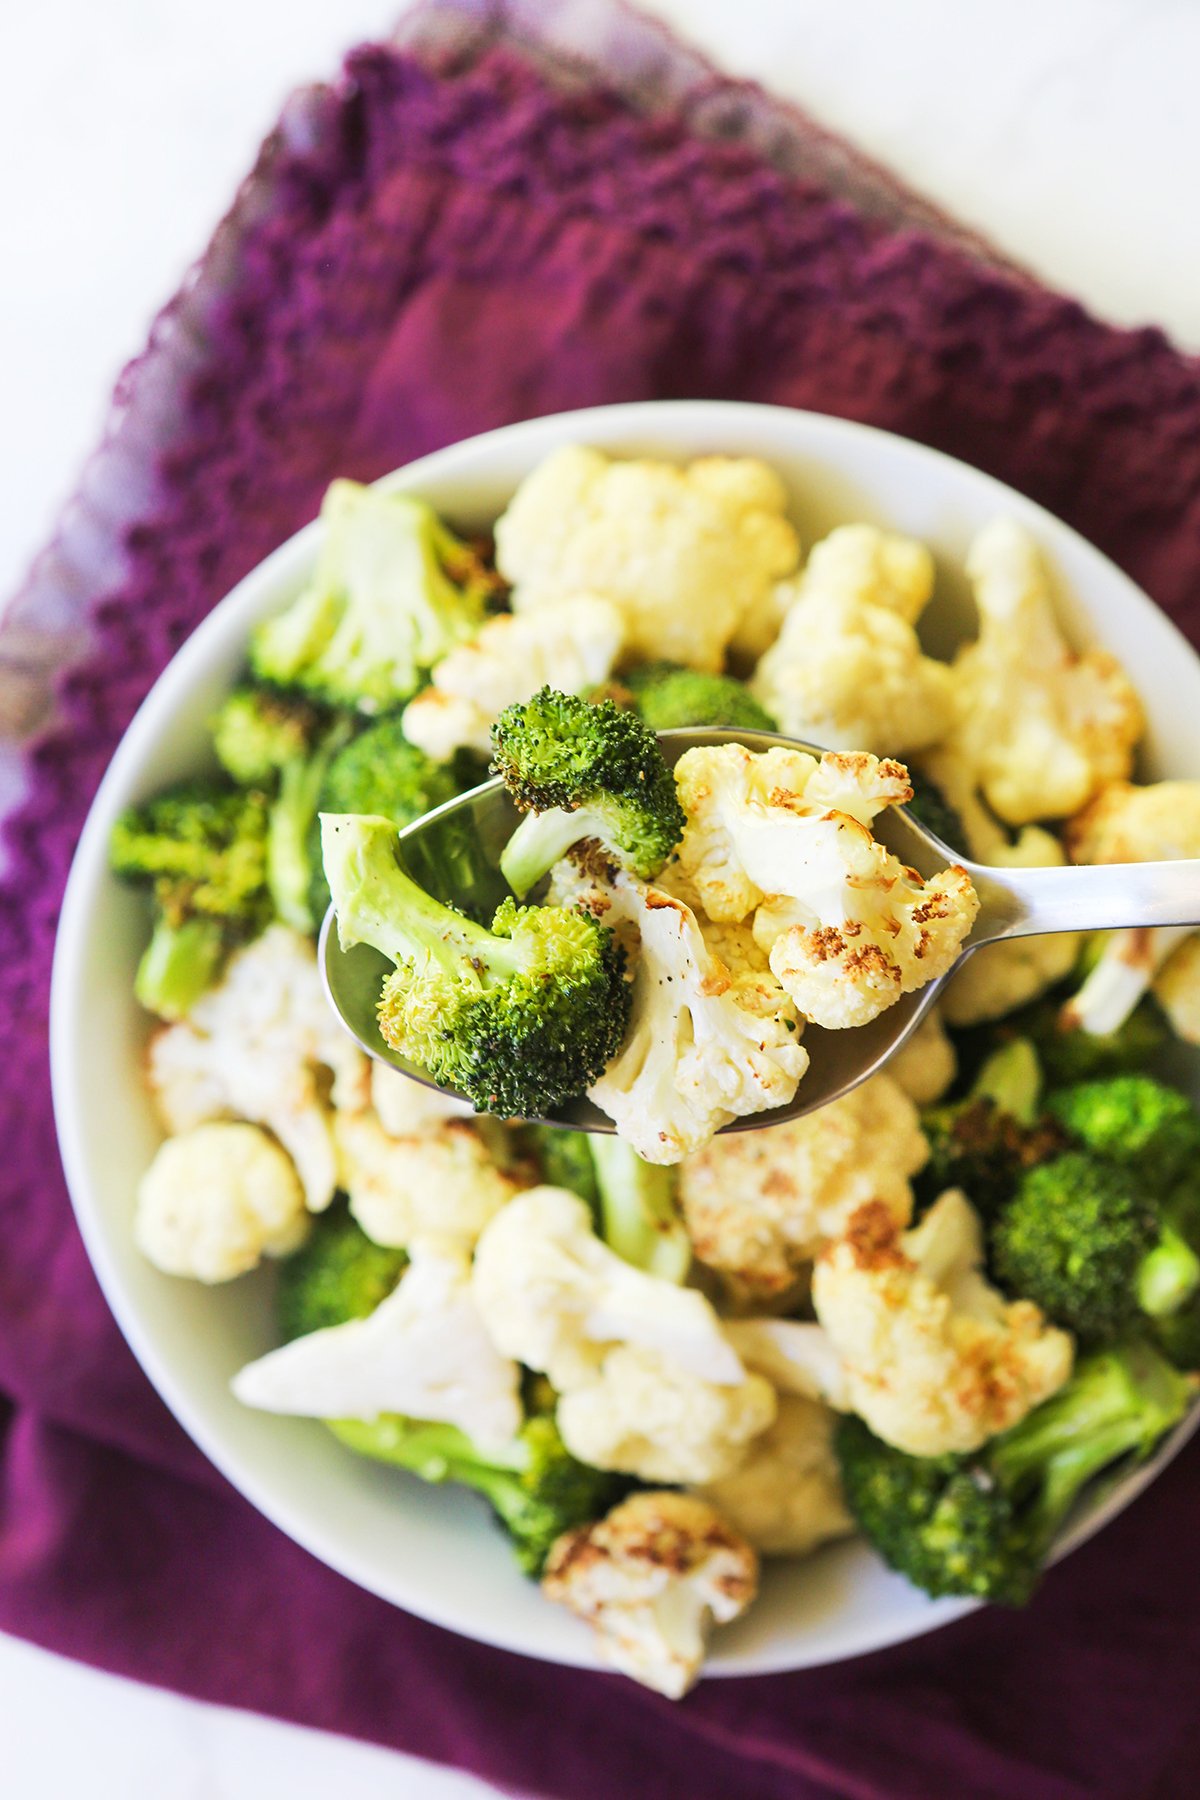 Spoon holding cooked broccoli and cauliflower florets over a serving bowl.